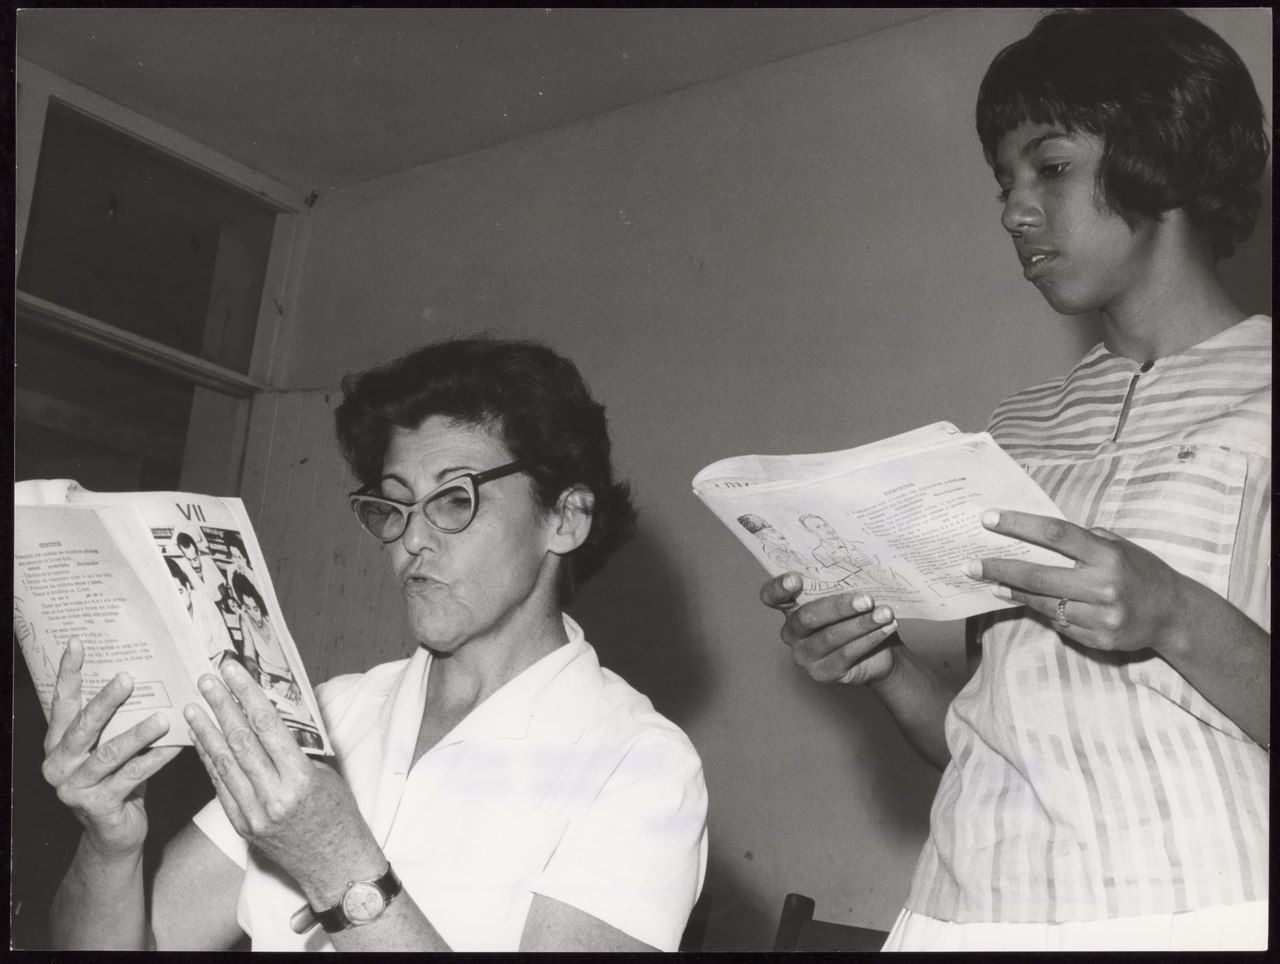 In 1961, thousands of Cuban volunteers traveled around the island helping students learn to read. Teaching literacy skills is a critical tool of decolonization. Learn more about the campaign. Photo Source: Wikimedia Commons.